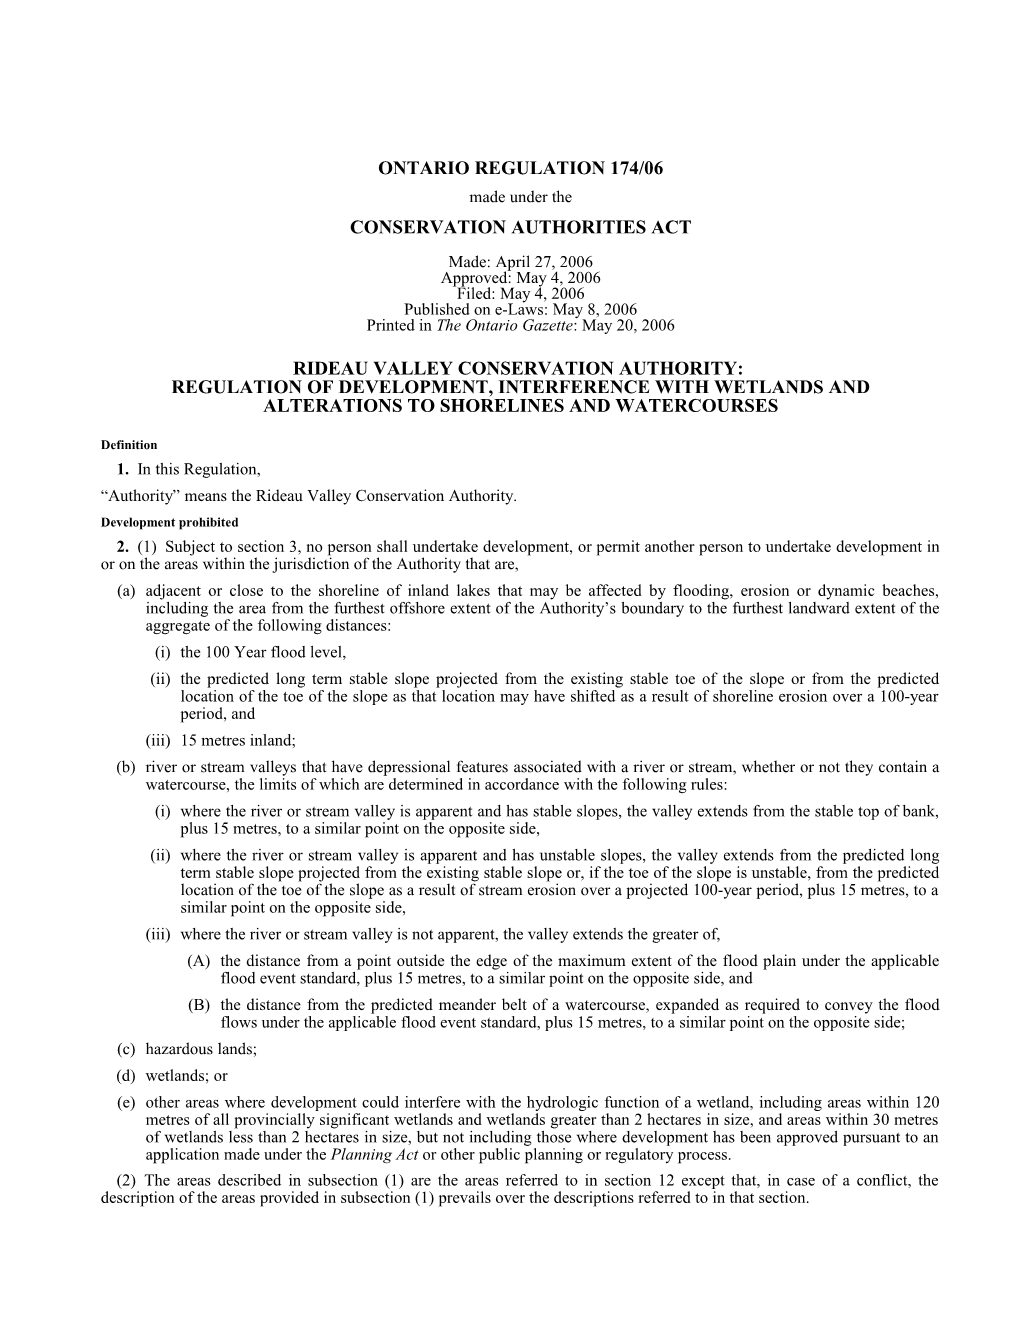 CONSERVATION AUTHORITIES ACT - O. Reg. 174/06